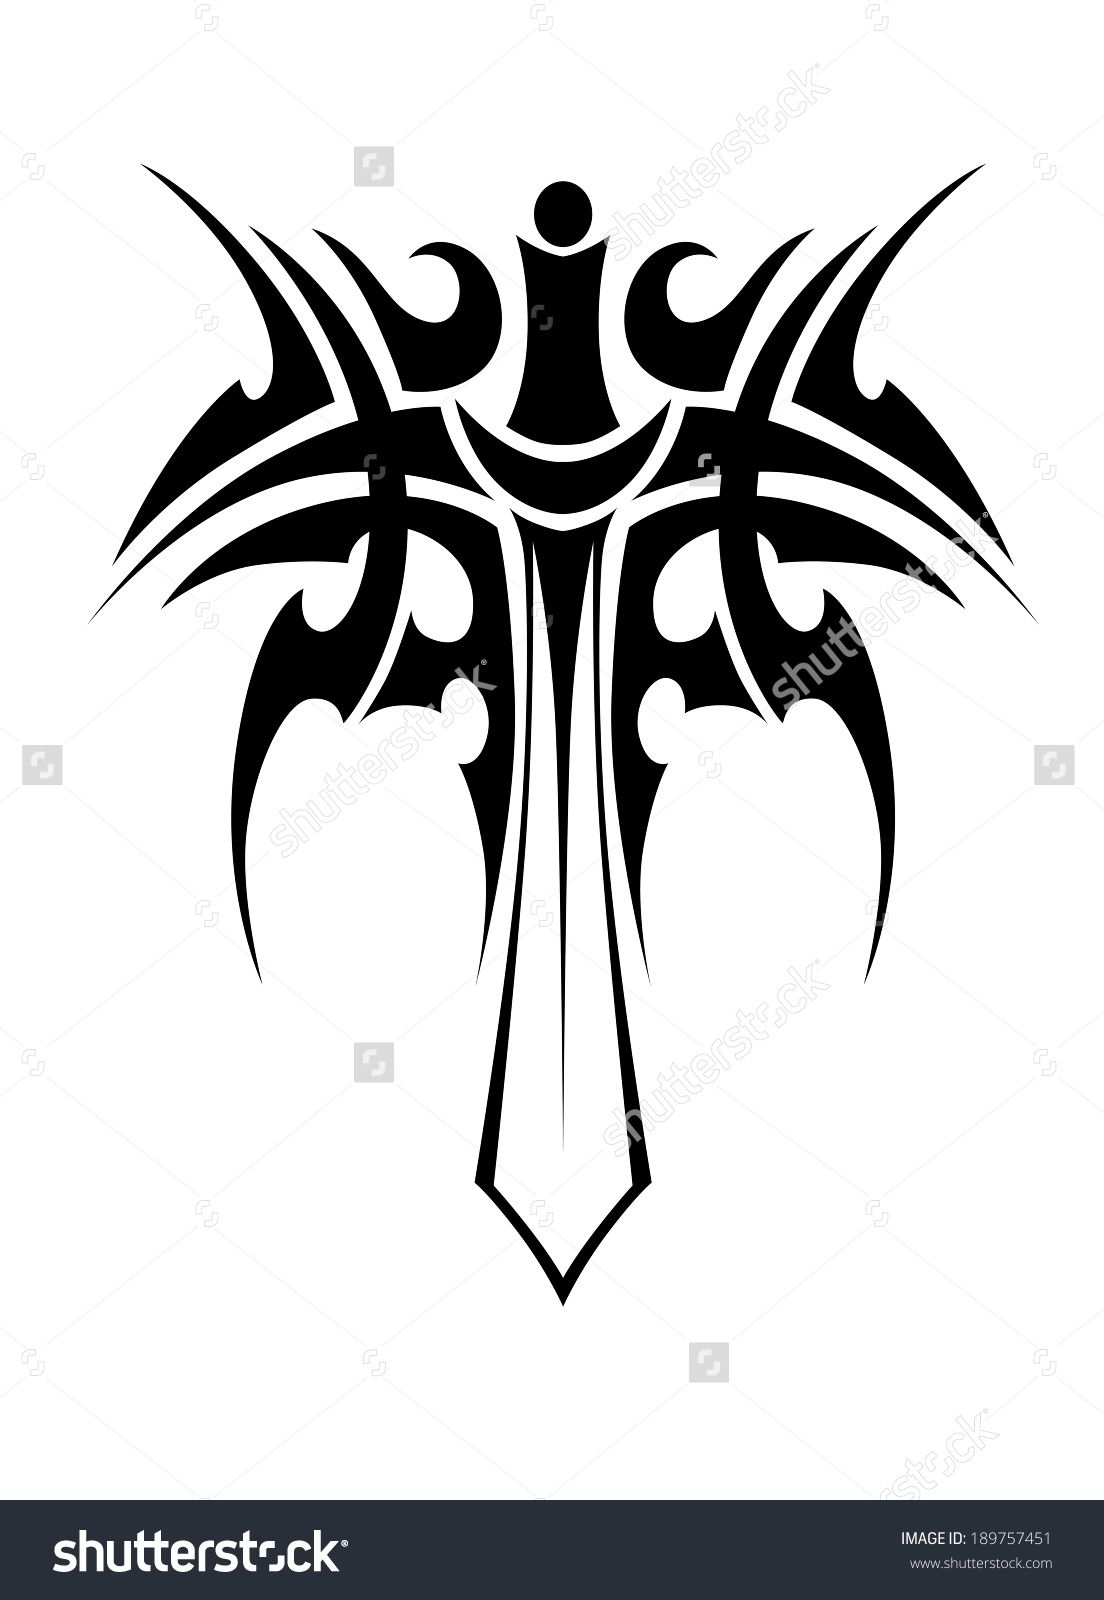 Tribal Tattoo With Knight Sword Isolated On White Background For regarding dimensions 1104 X 1600